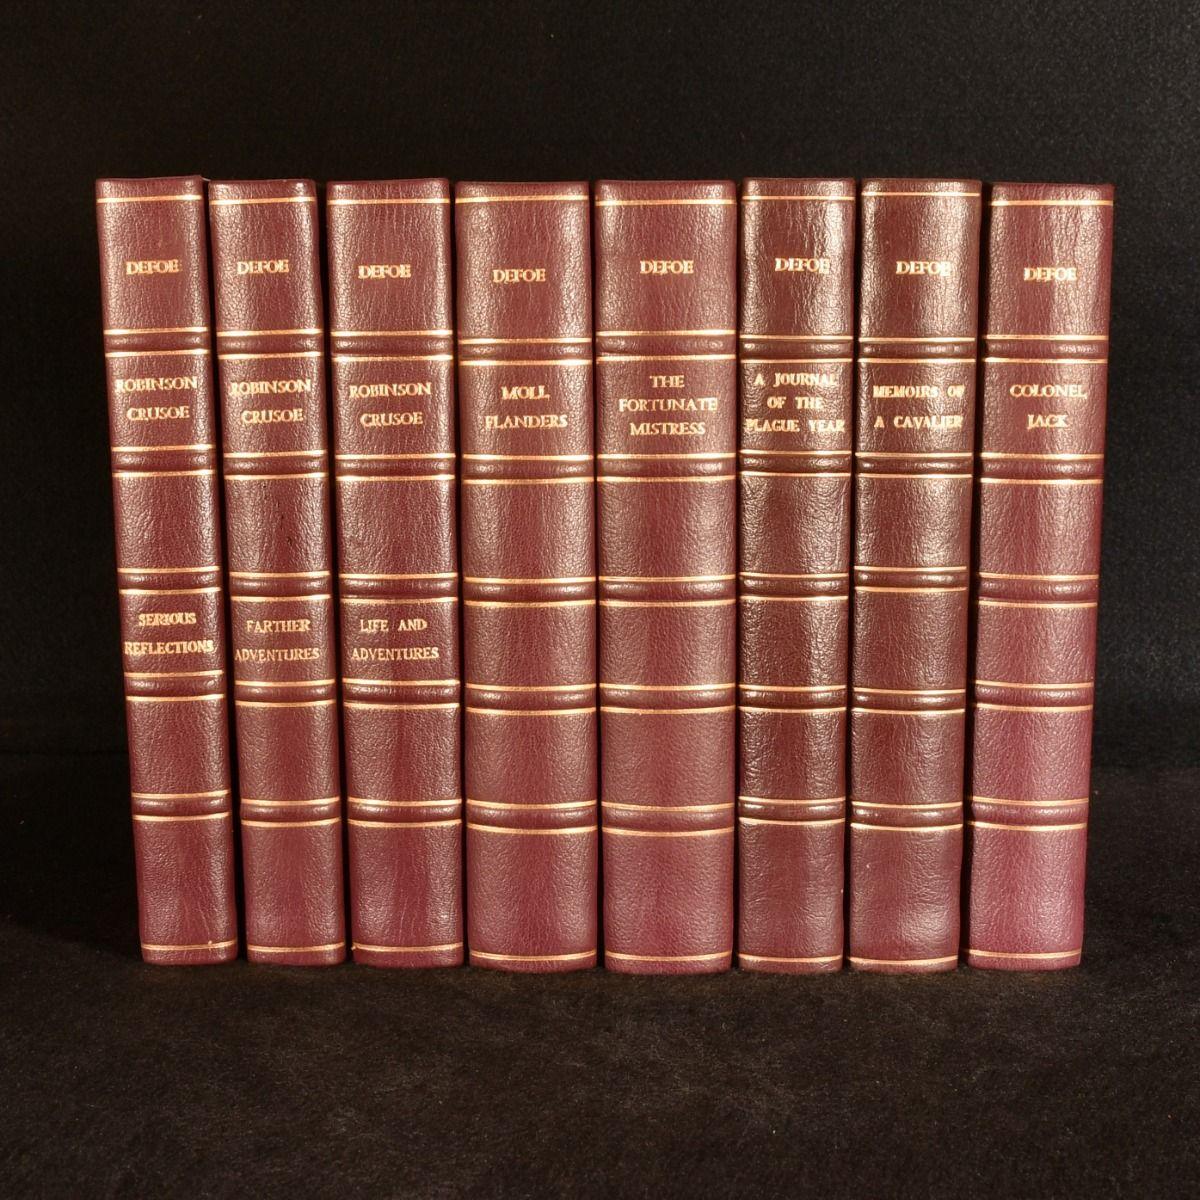 Eight volumes of limited edition works by the noted writer Daniel Defoe, including his best known works about the popular character Robinson Crusoe, bound in crushed half morocco.

Limited edition. Limited to 775 copies. 

Bound in crushed half